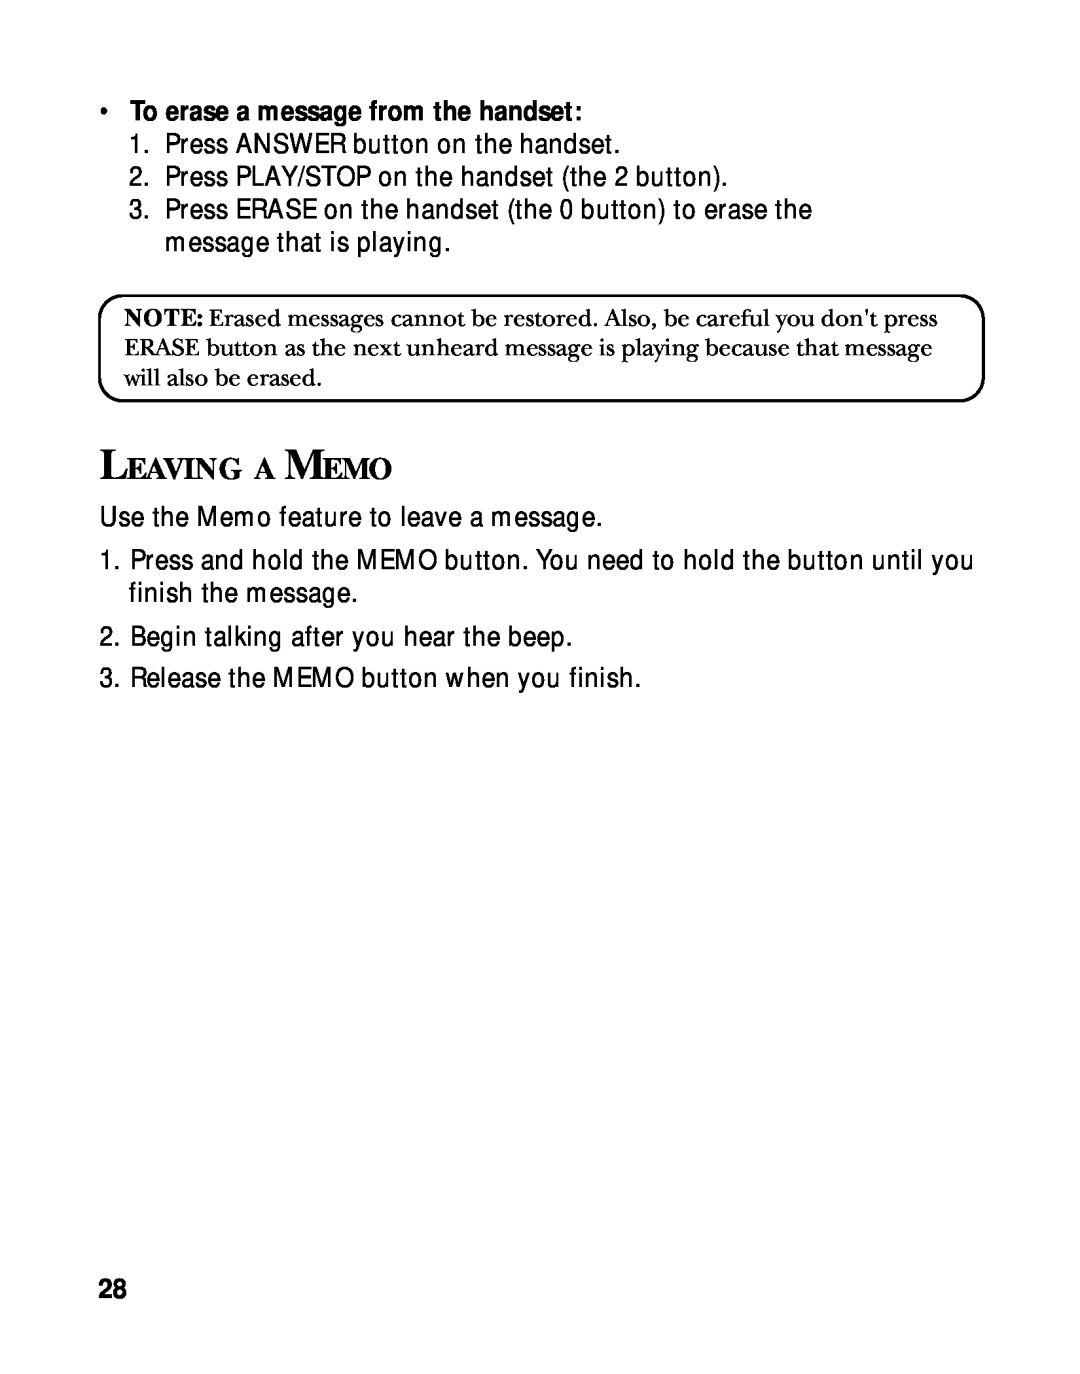 RCA 900 MHz manual Leaving A Memo, To erase a message from the handset 